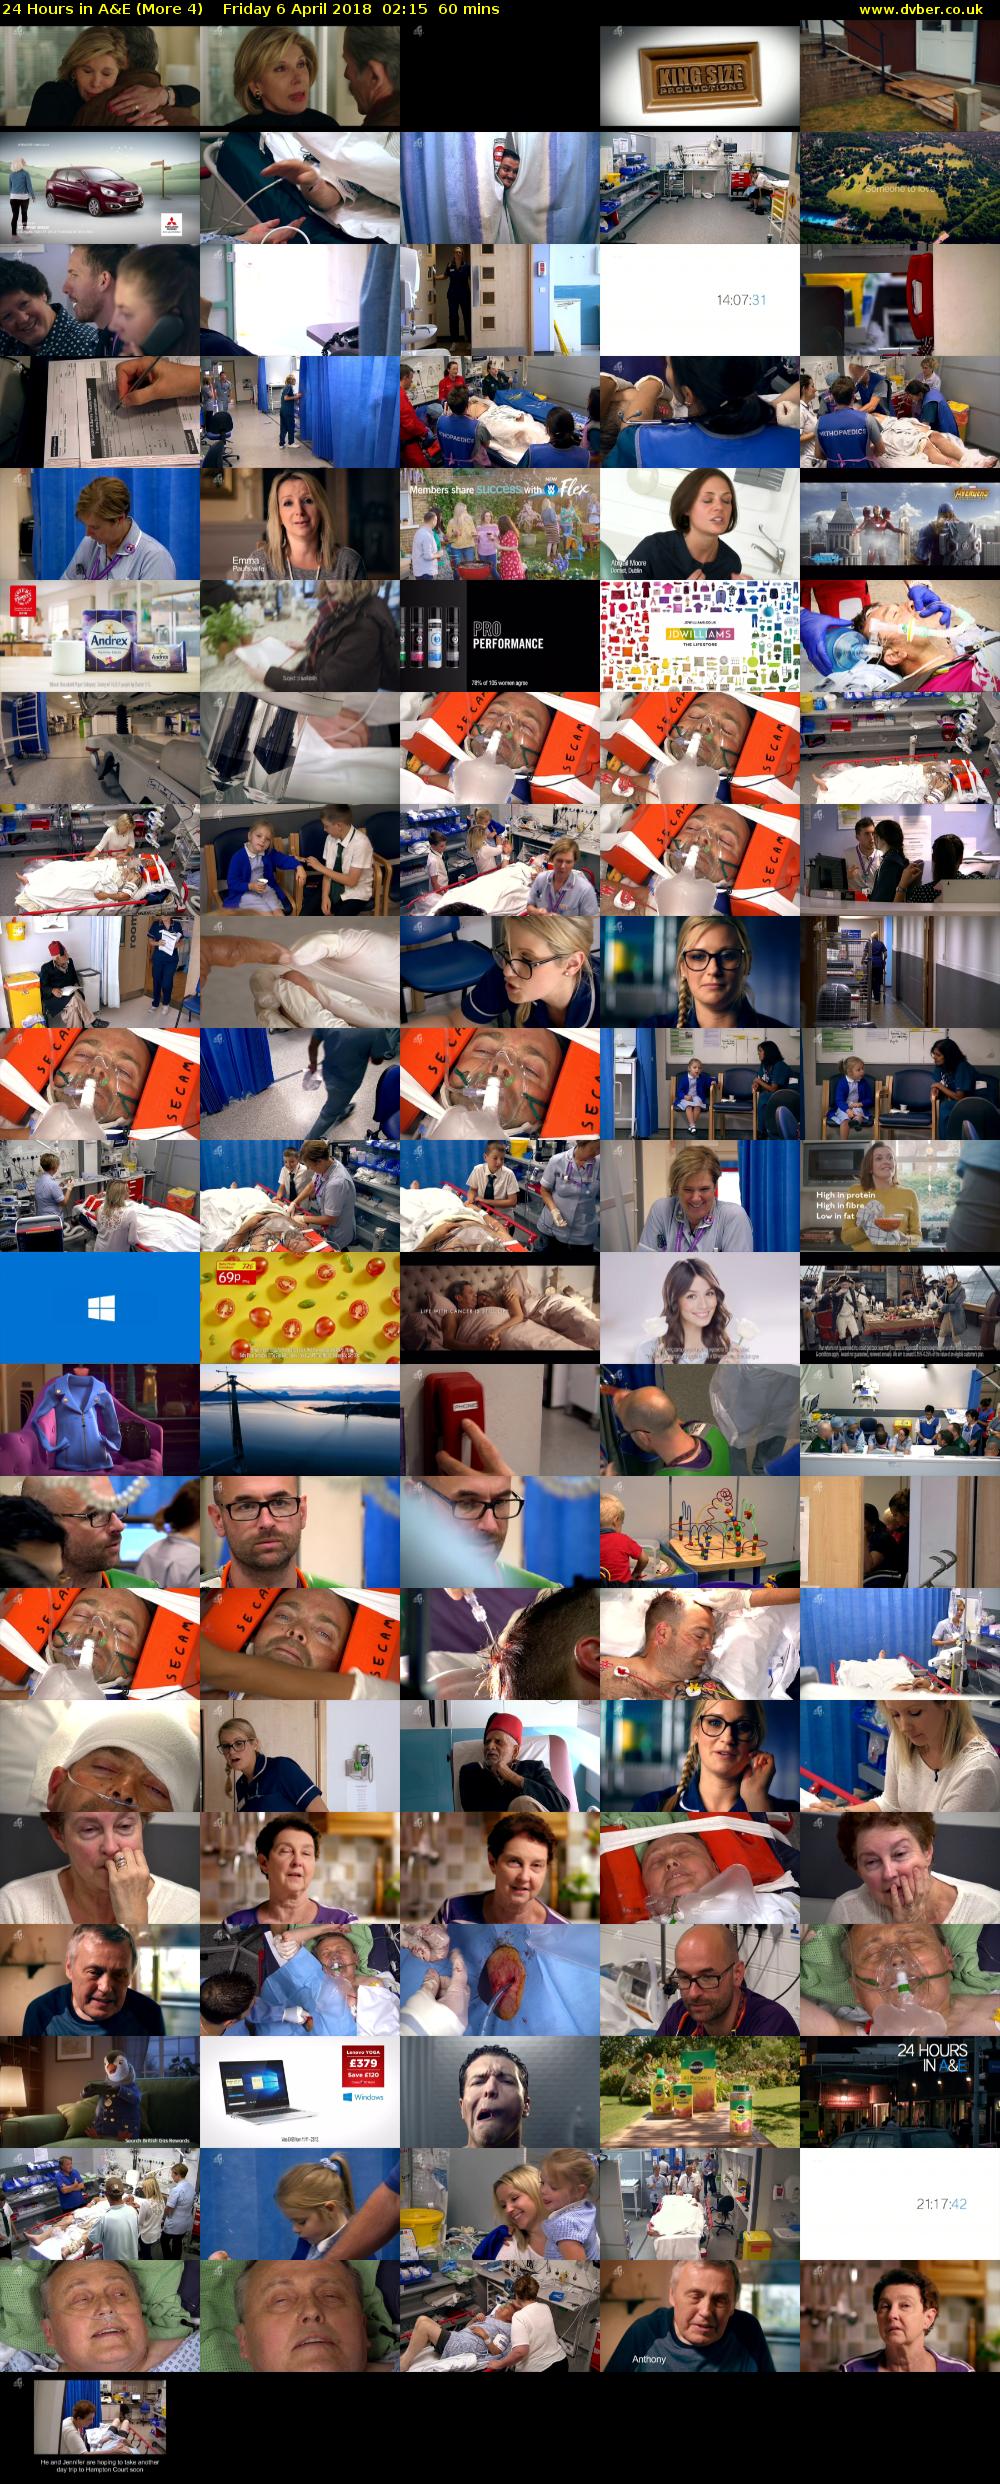 24 Hours in A&E (More 4) Friday 6 April 2018 02:15 - 03:15